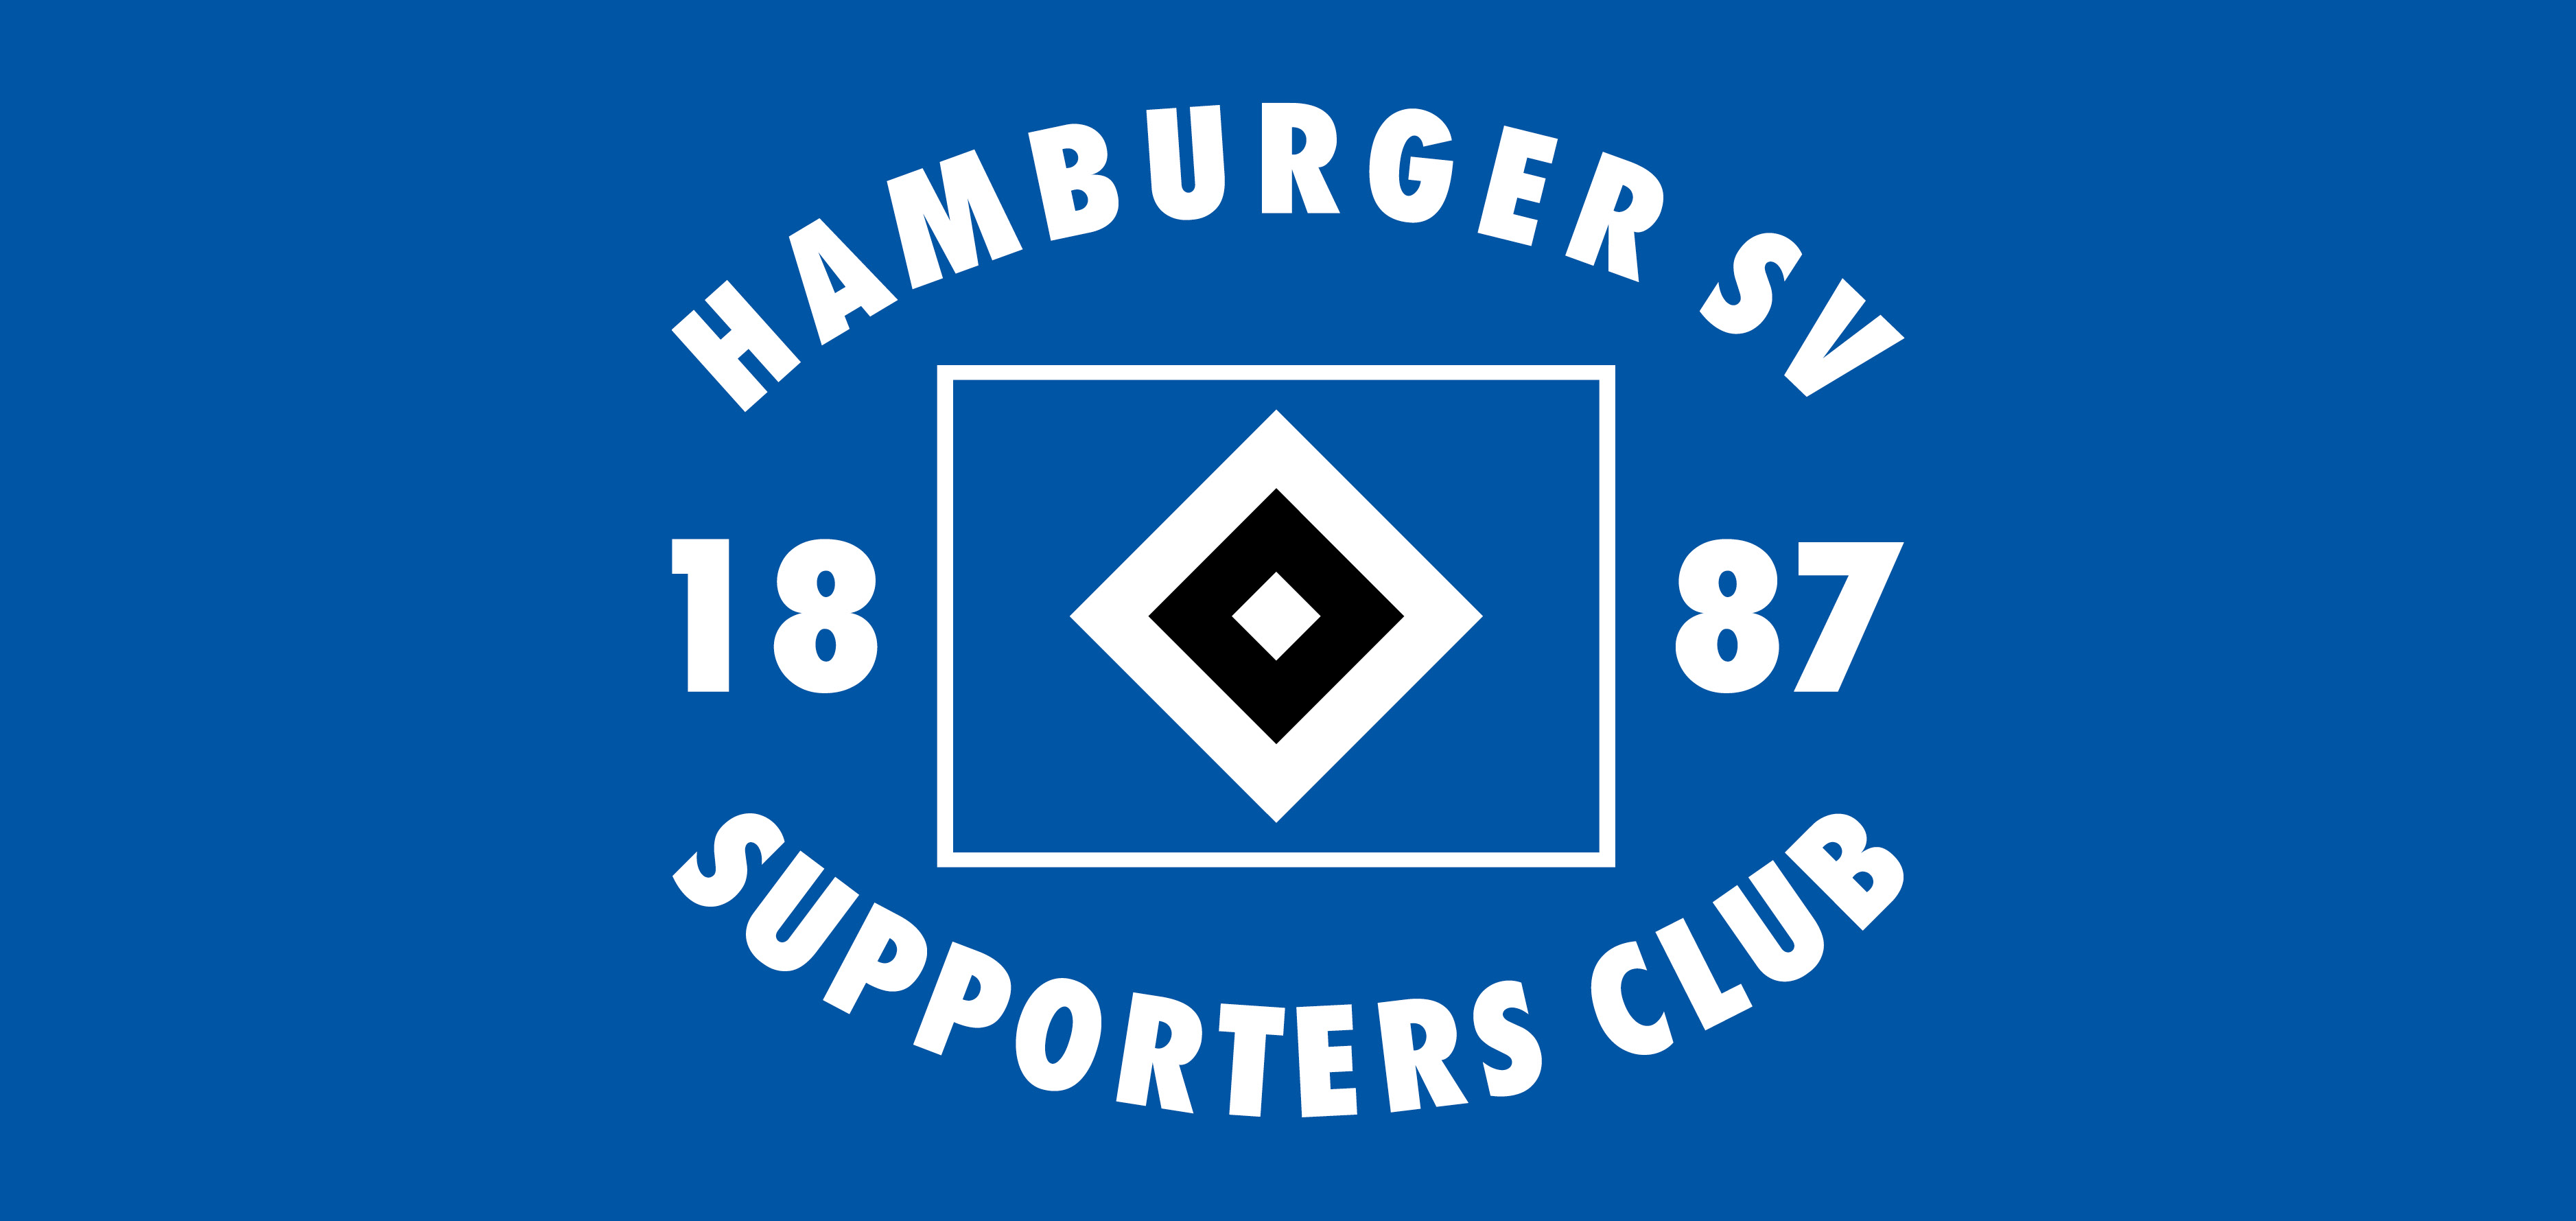 Hsv Supporters